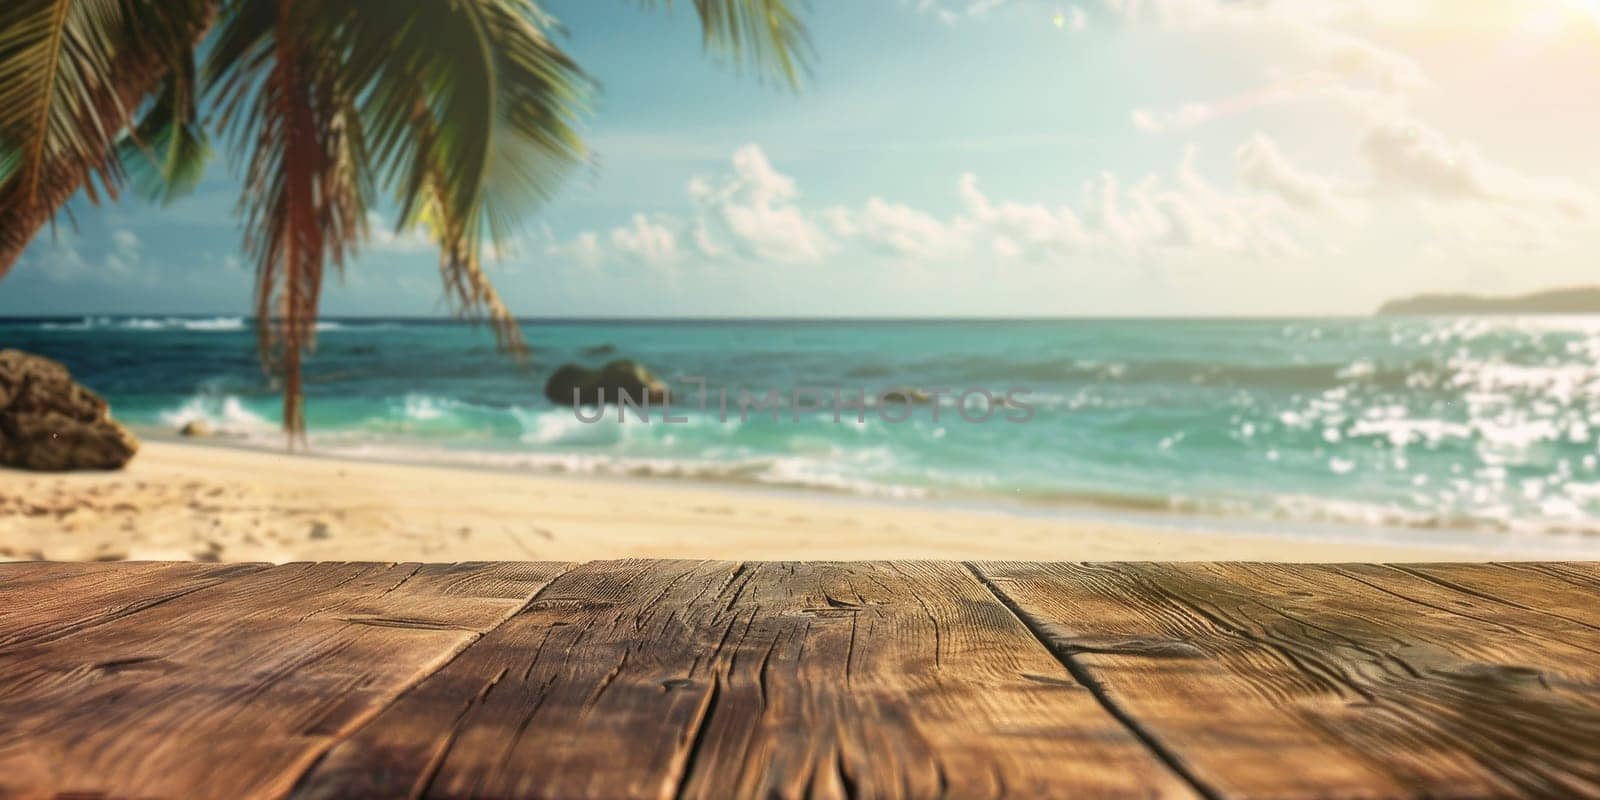 A beach scene with palm trees and a clear blue ocean by AI generated image.